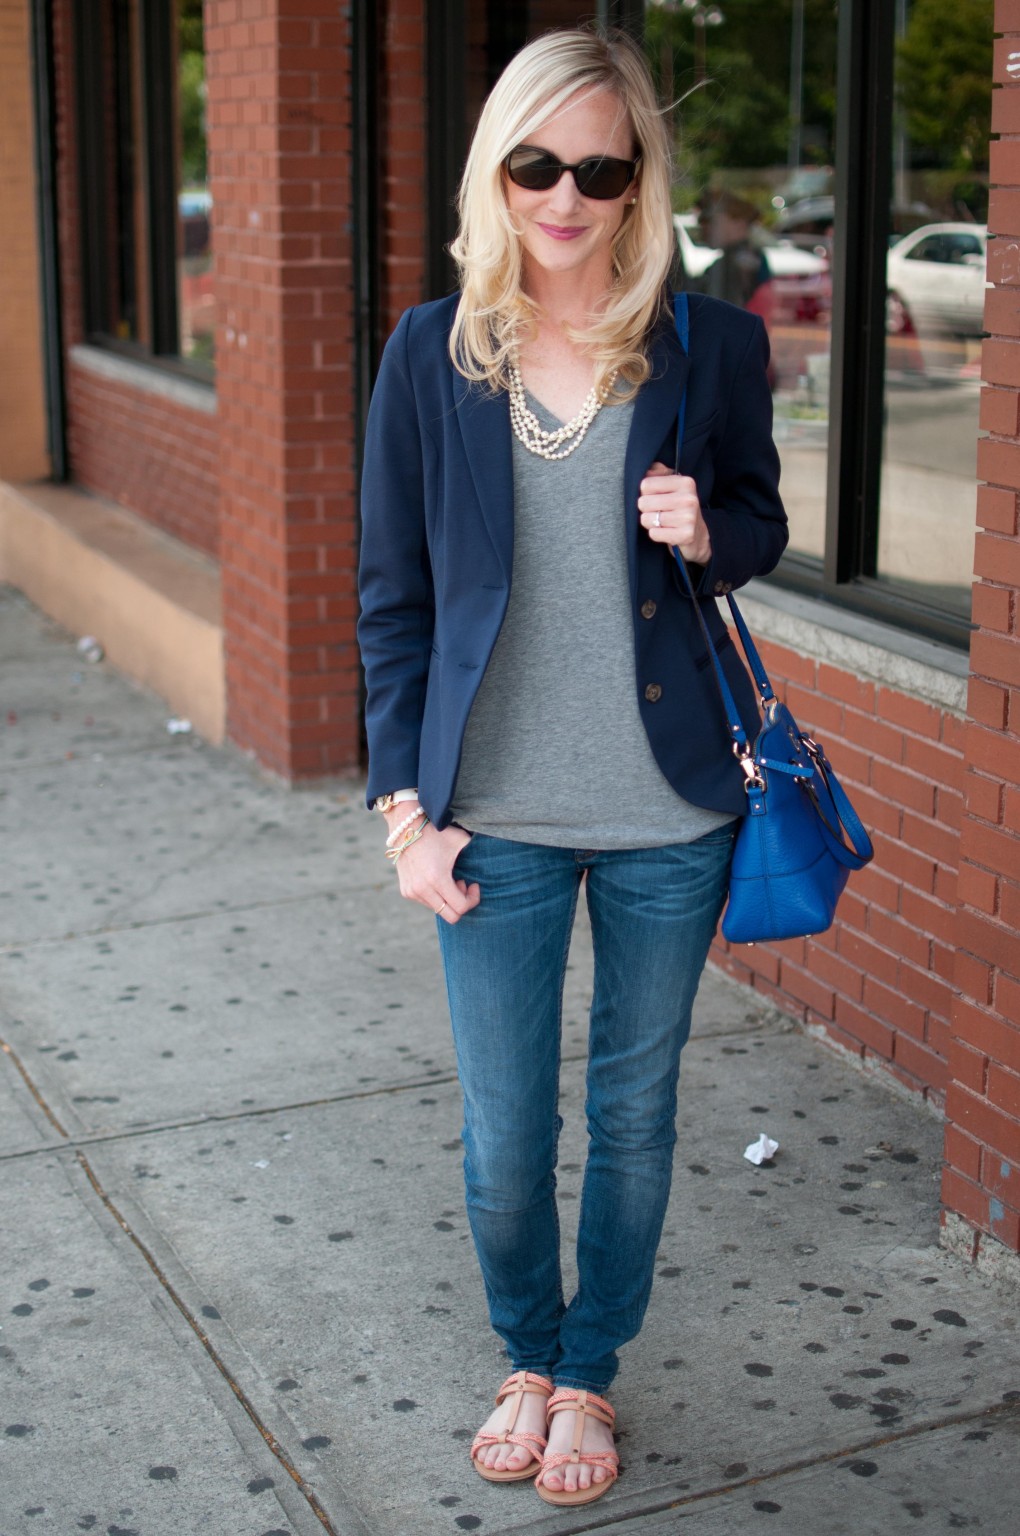 Casual Friday: Jeans, T-Shirts, and Bright Blue Bags